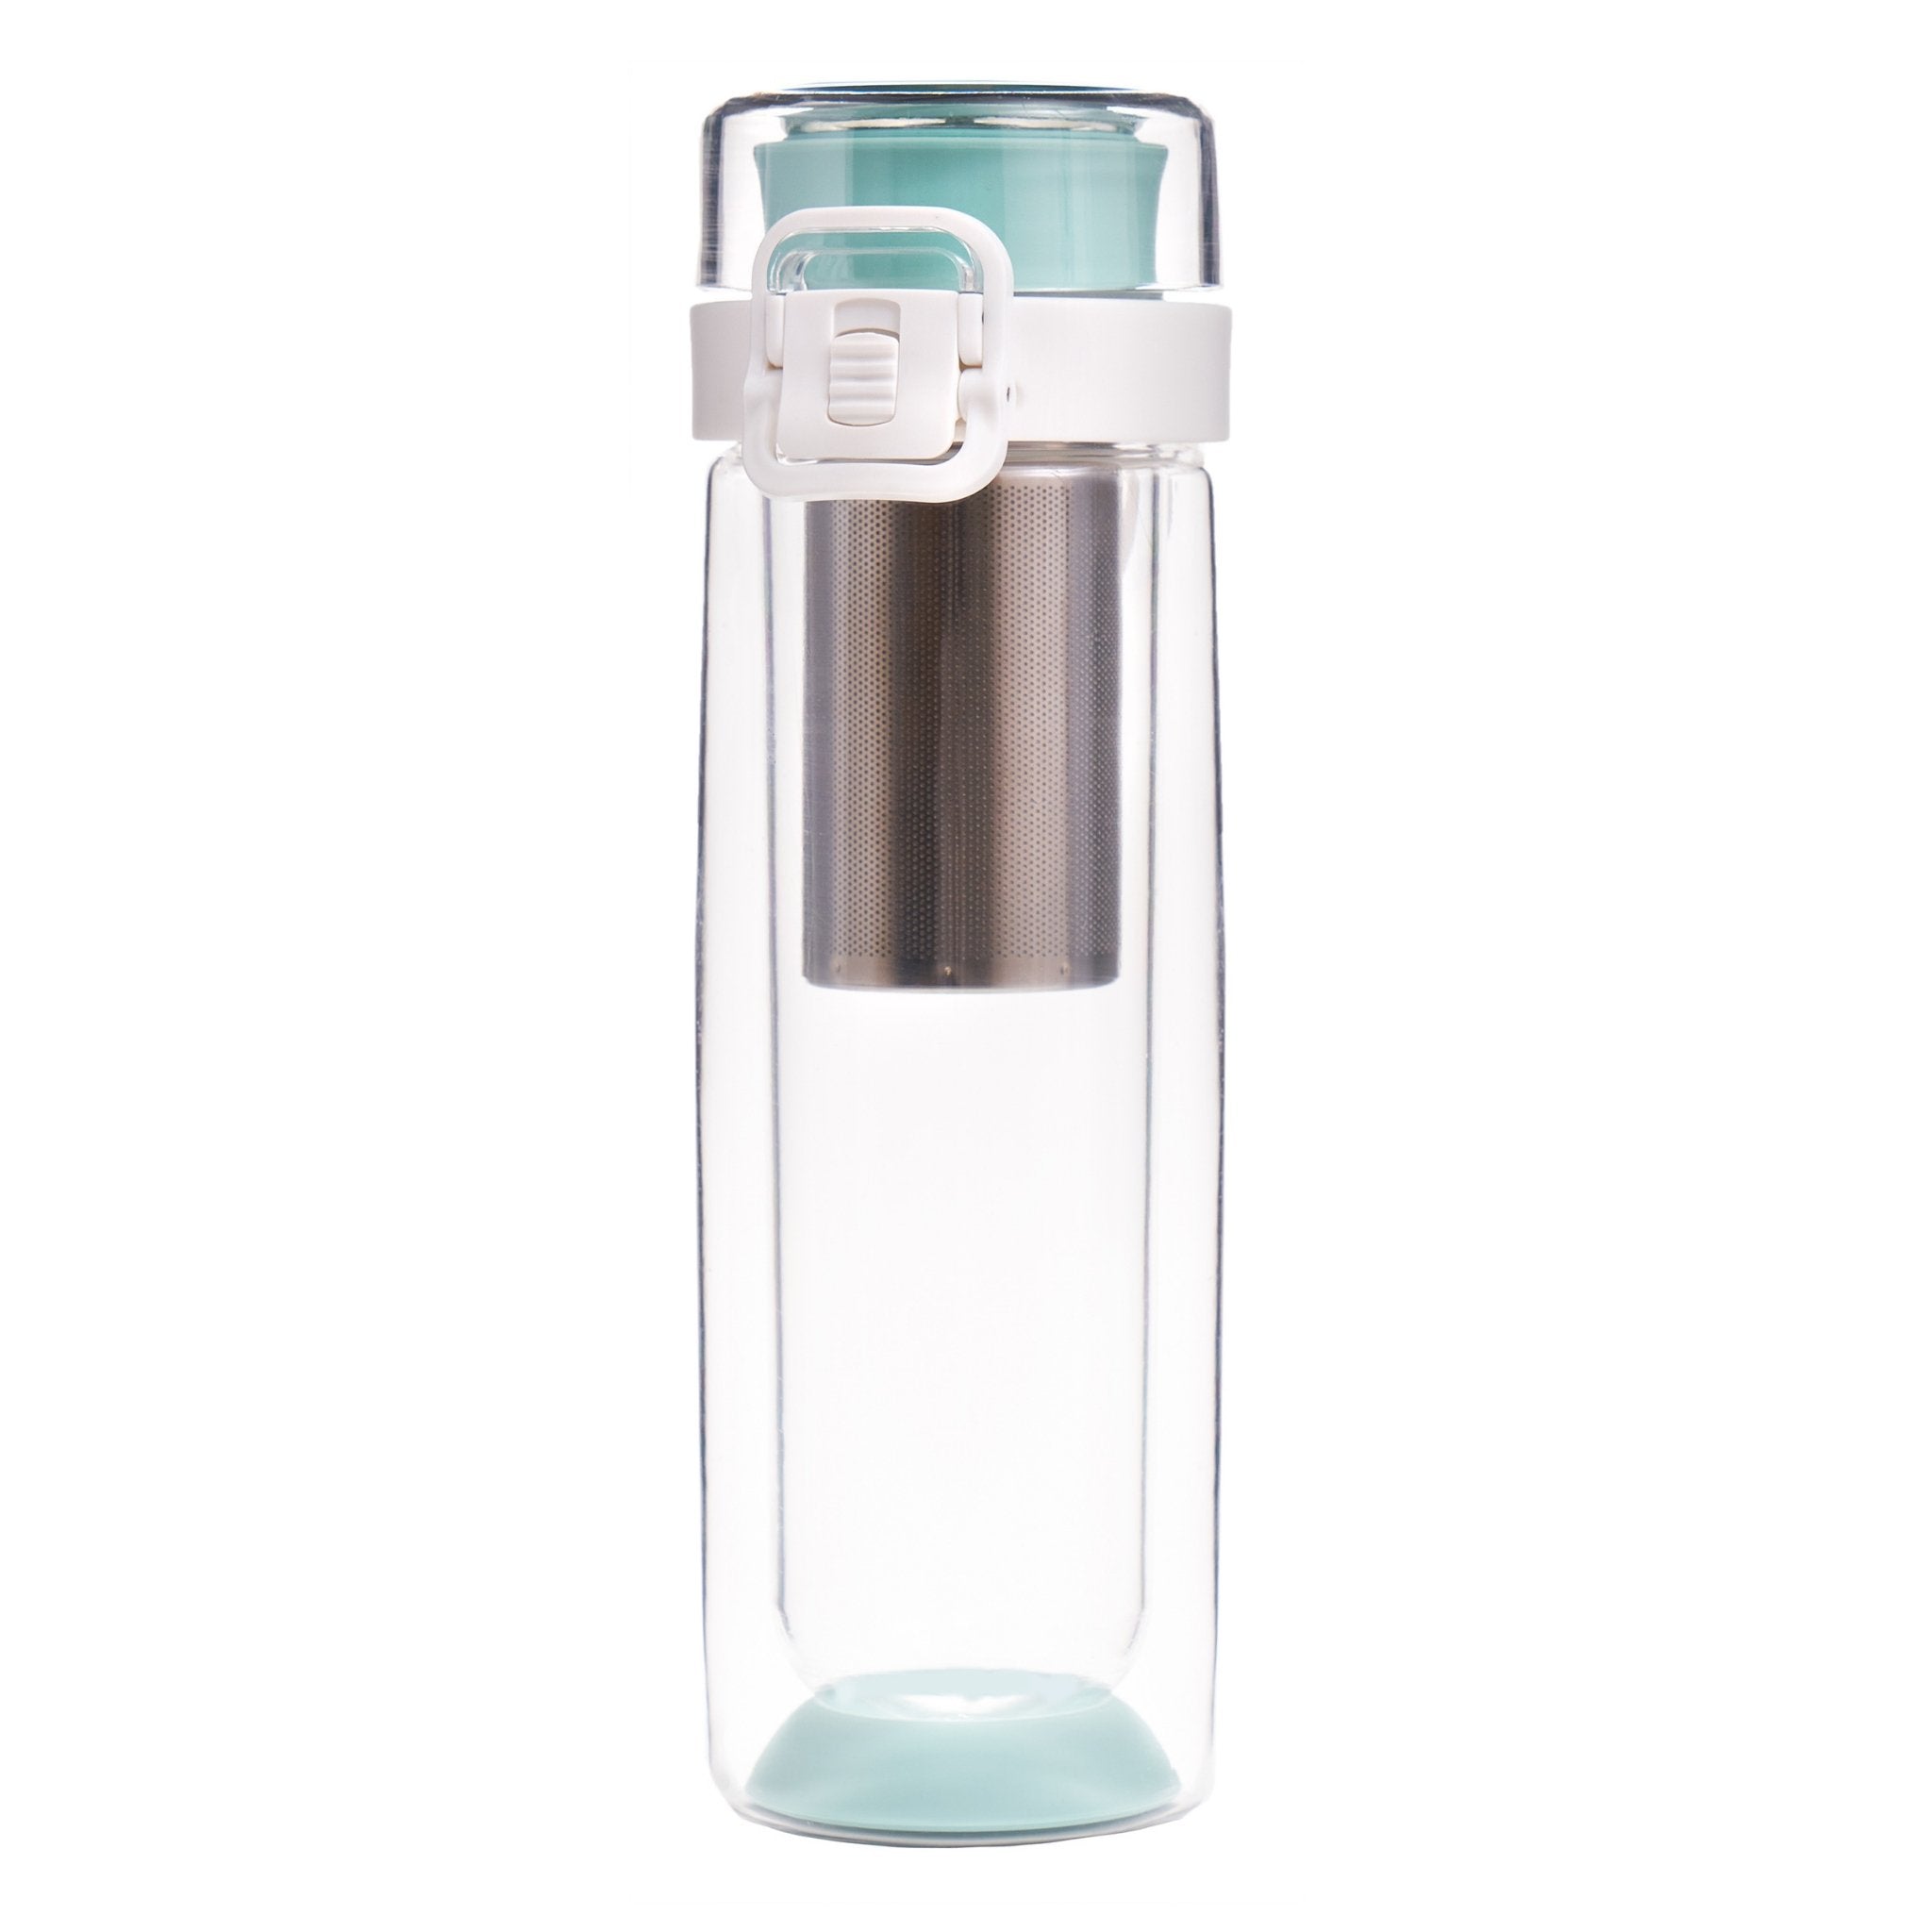 Tea Infuser Bottle Perfect for Either Hot or Cold Brew Fruit